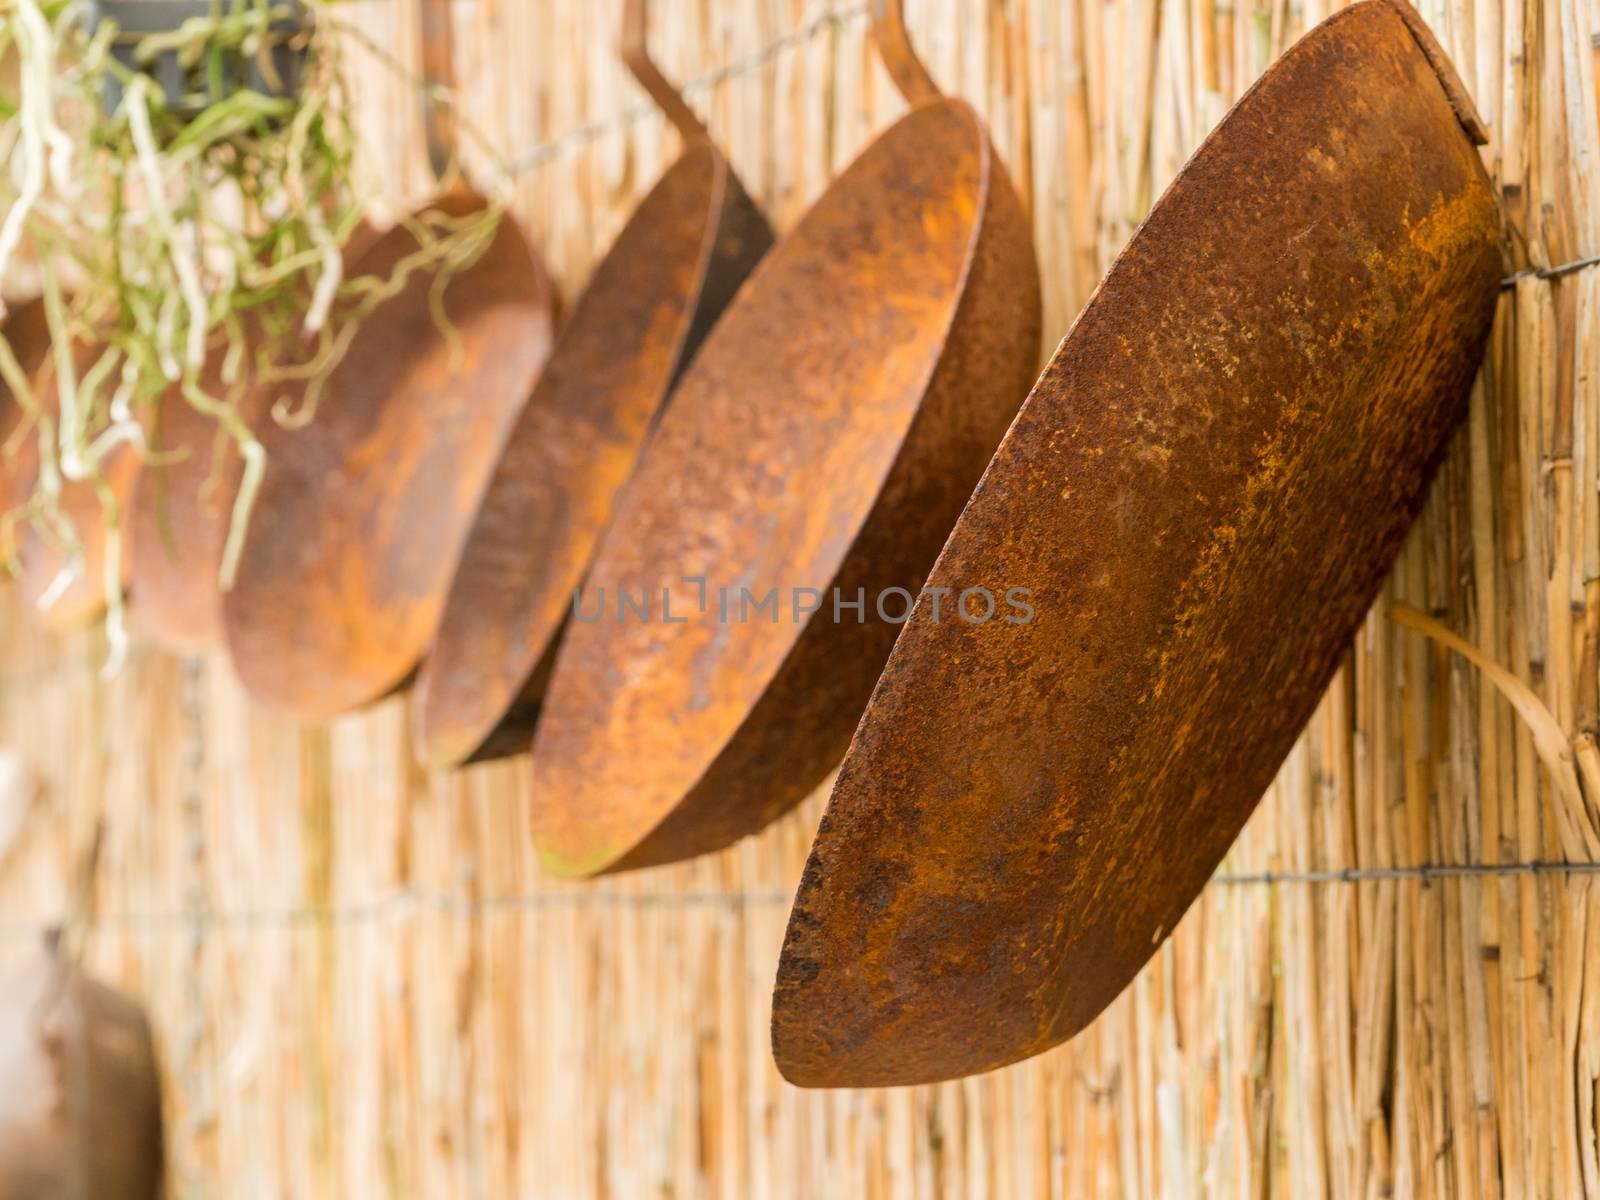 Row of rusty pans hanging on a straw wall